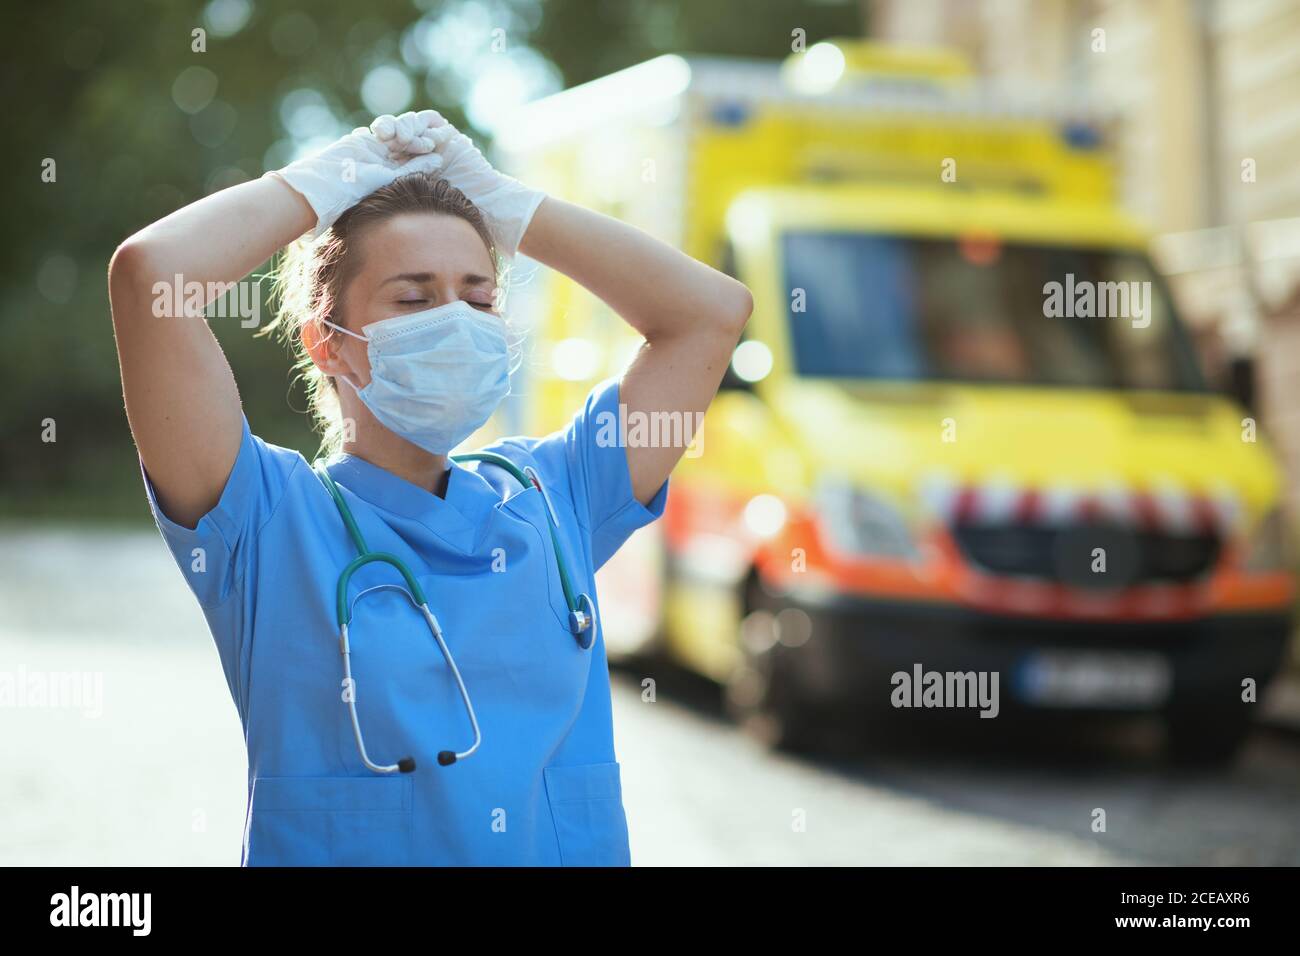 coronavirus pandemic. tired modern paramedic woman in scrubs with stethoscope and medical mask outdoors near ambulance. Stock Photo